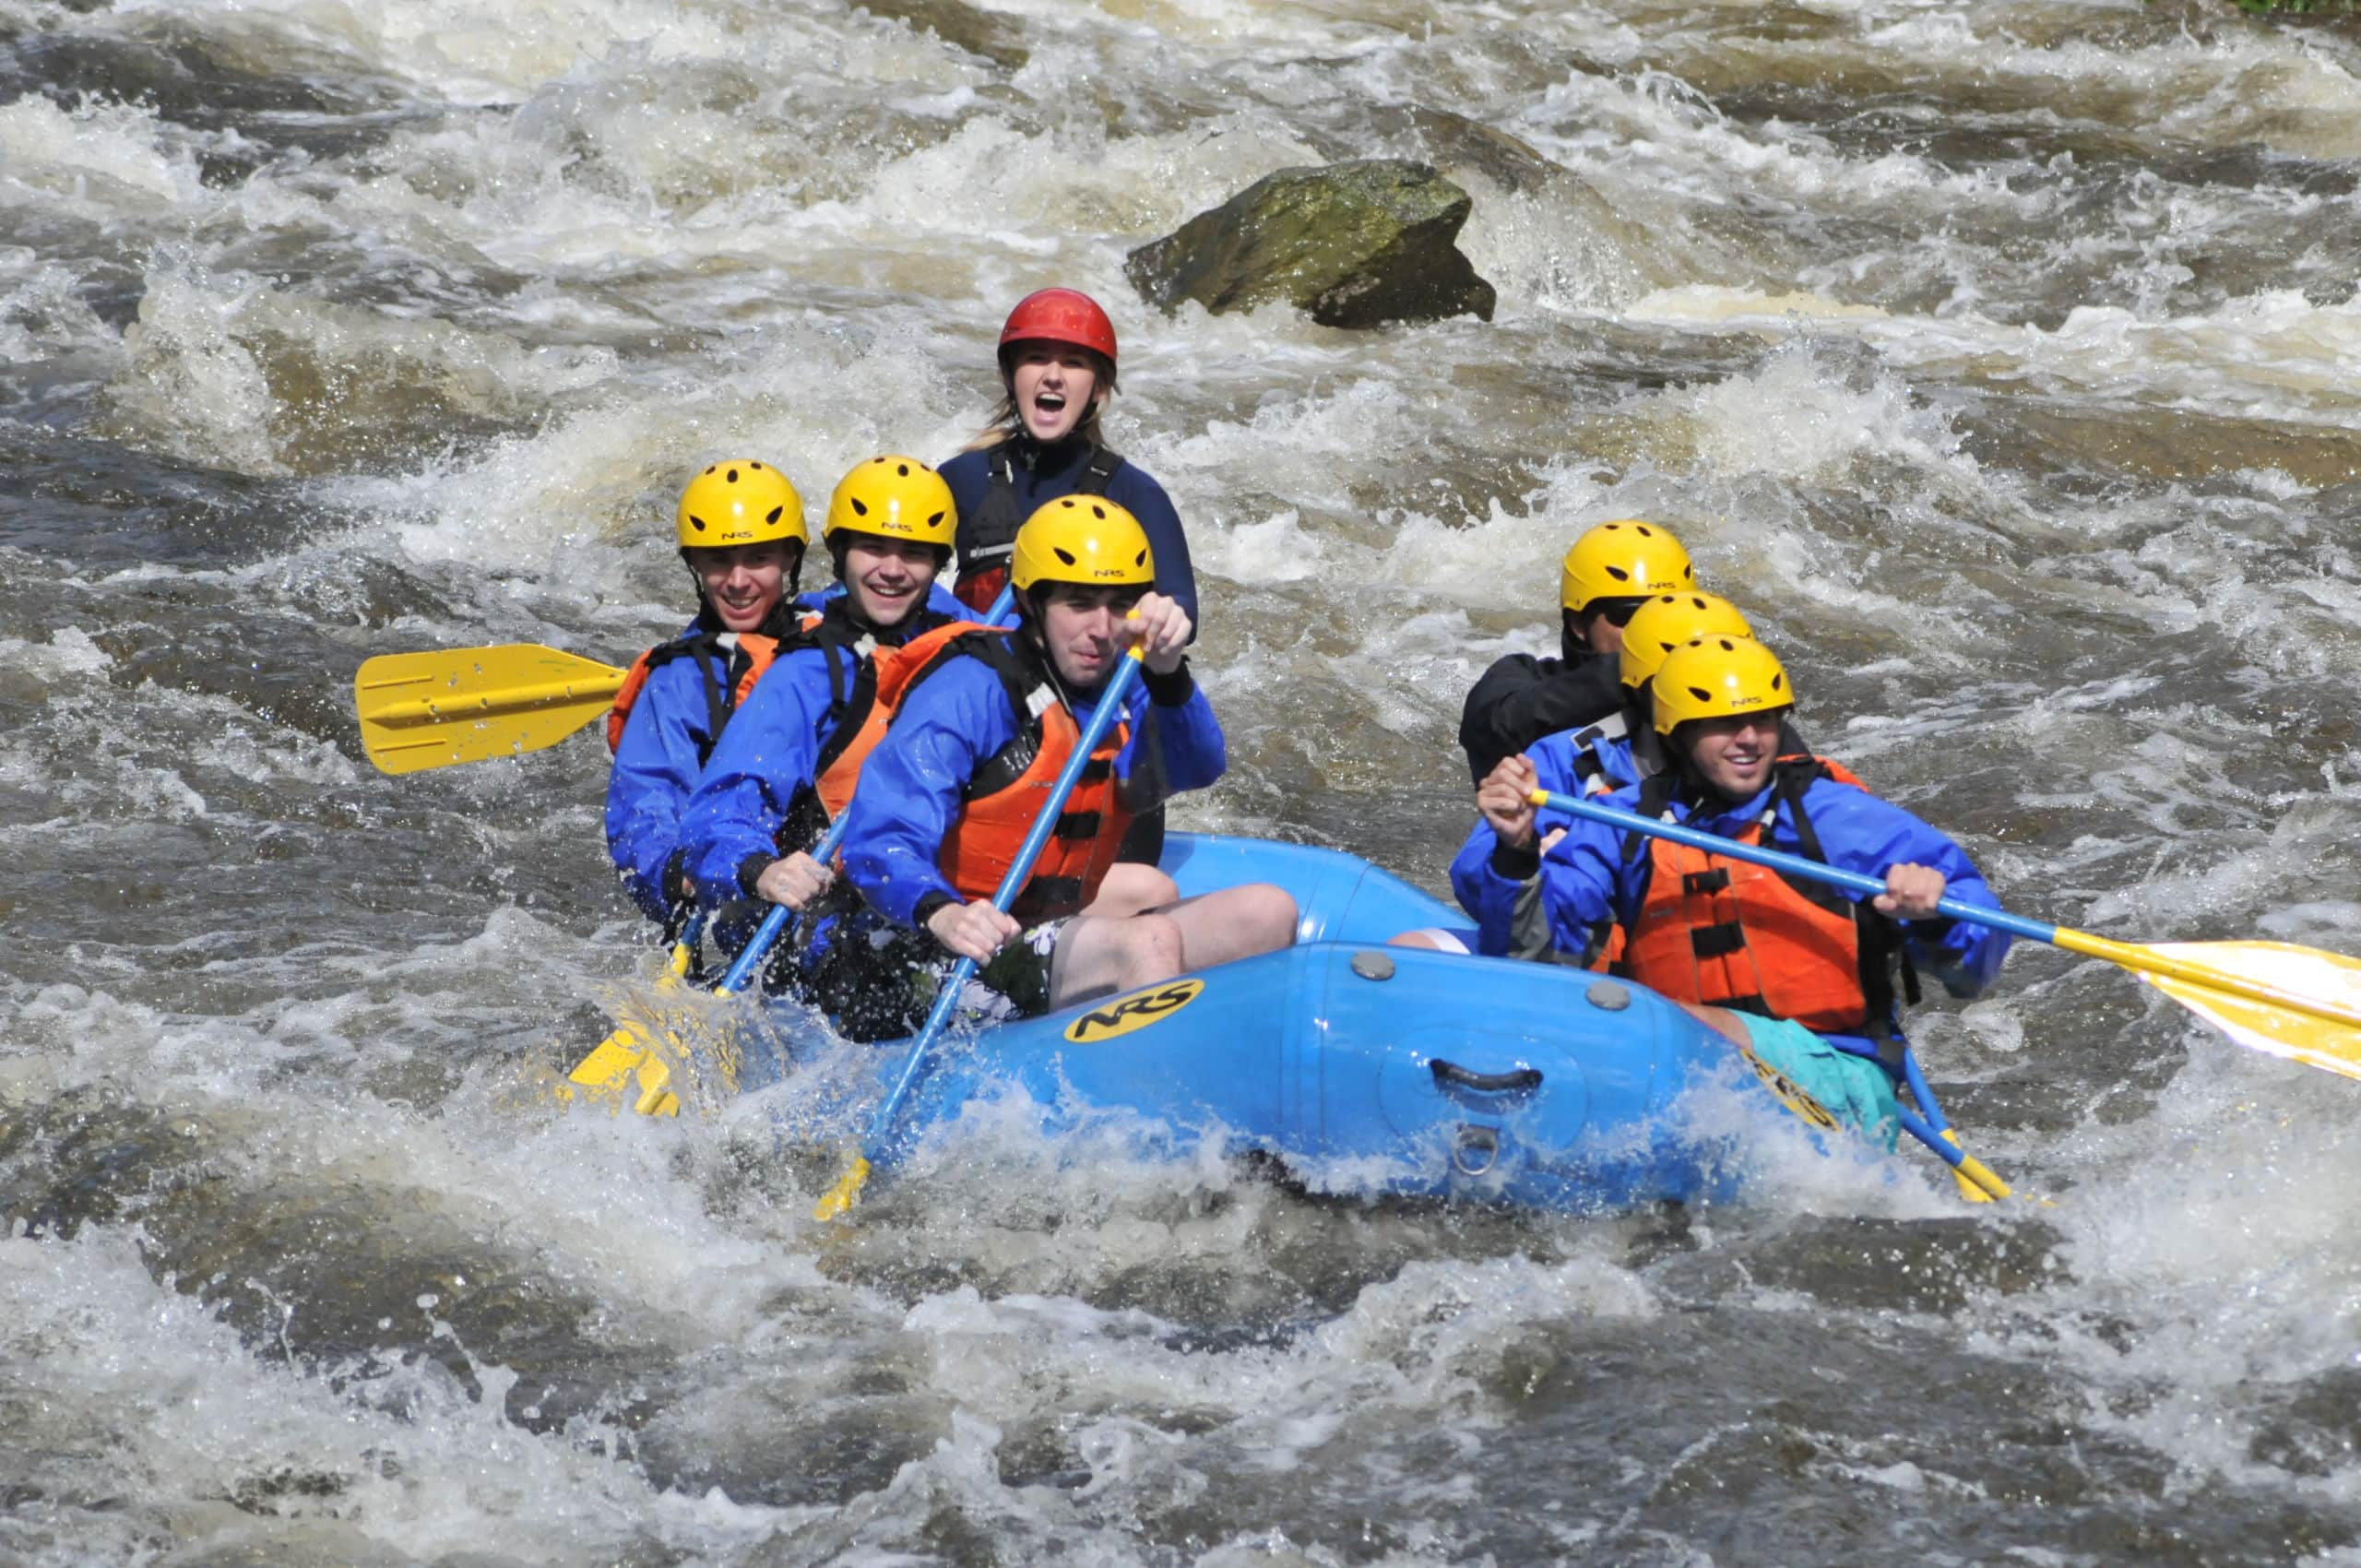 Group of young college students on the Zoar Gap trip headed through whitewater